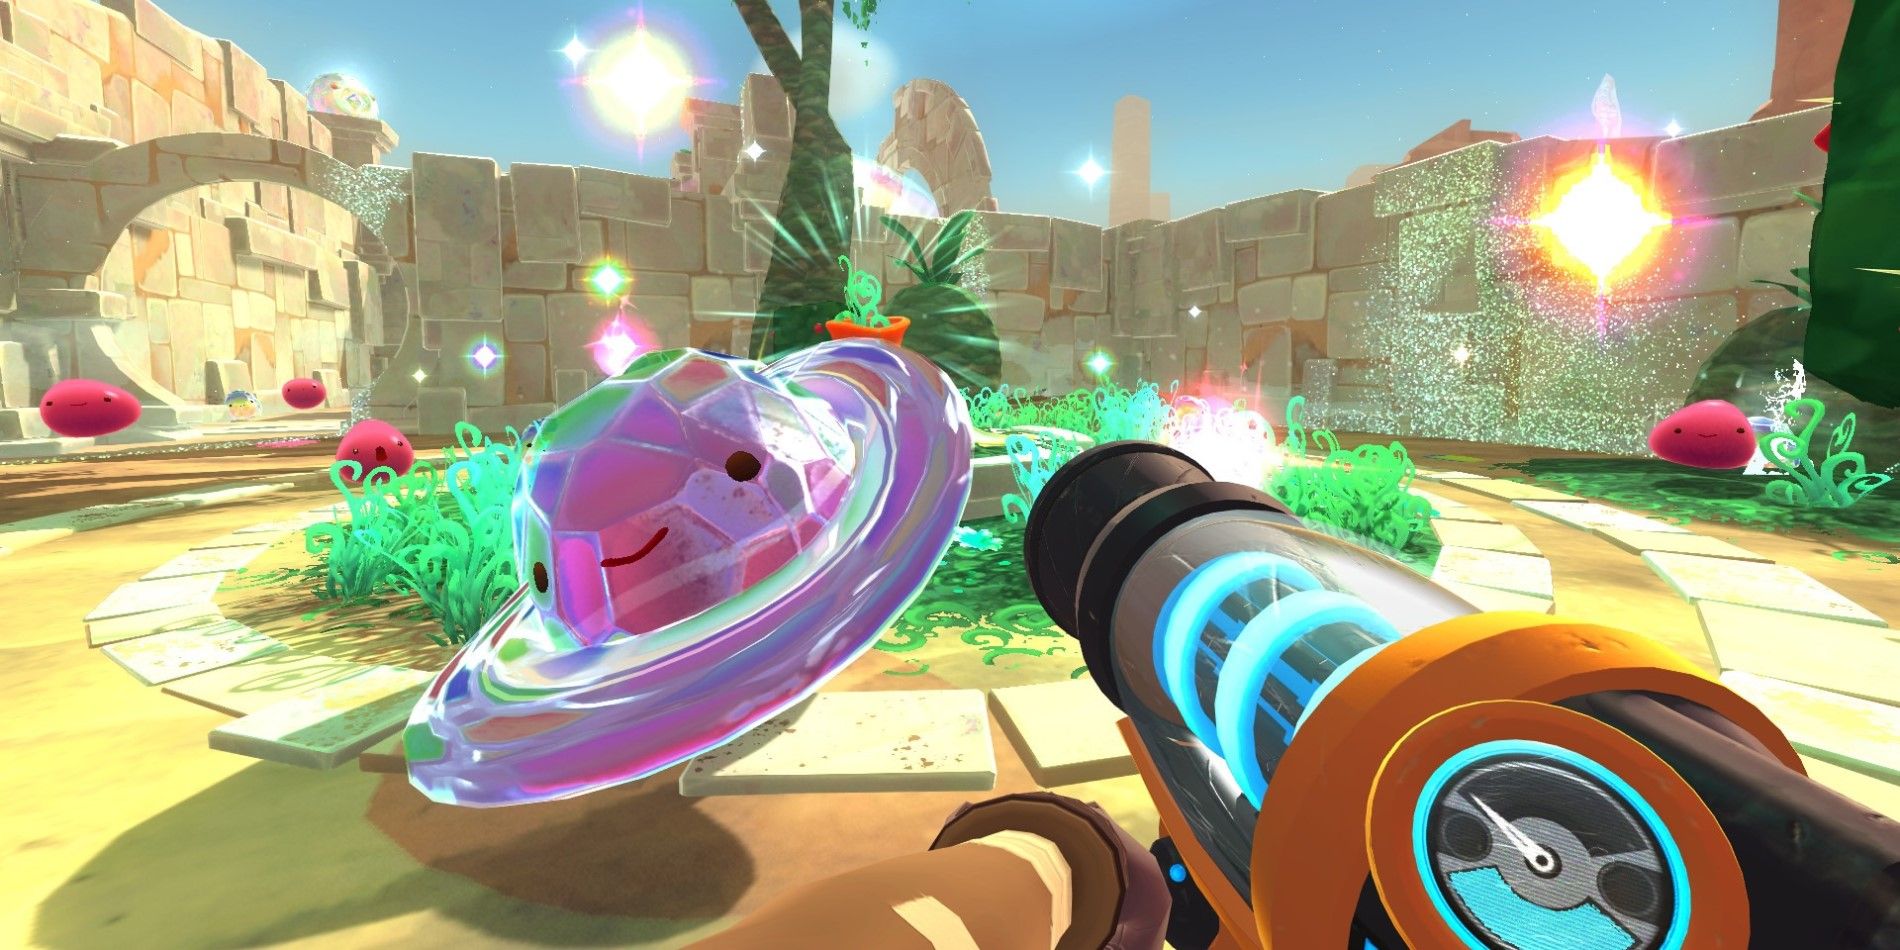 will slime rancher 2 come to switch